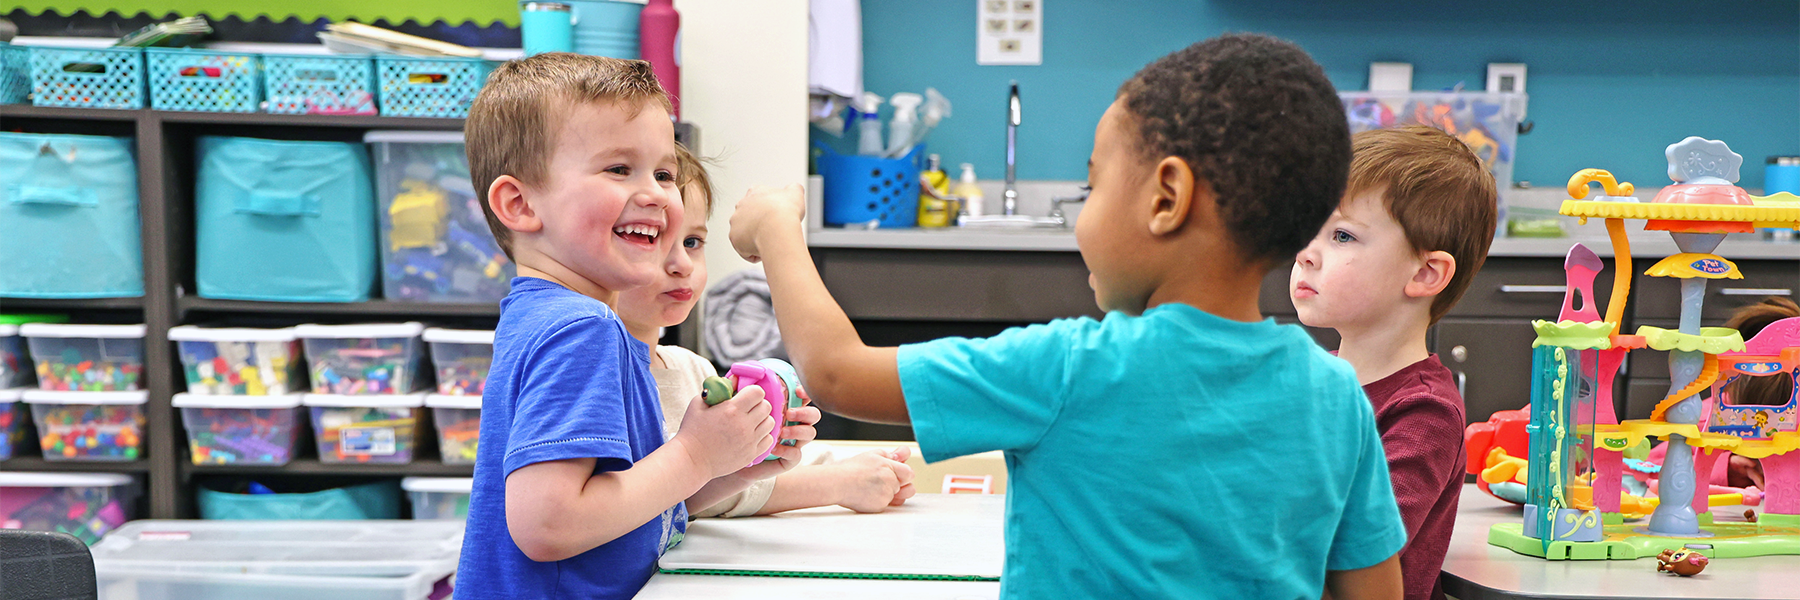 Kids laughing while active at table in classroom